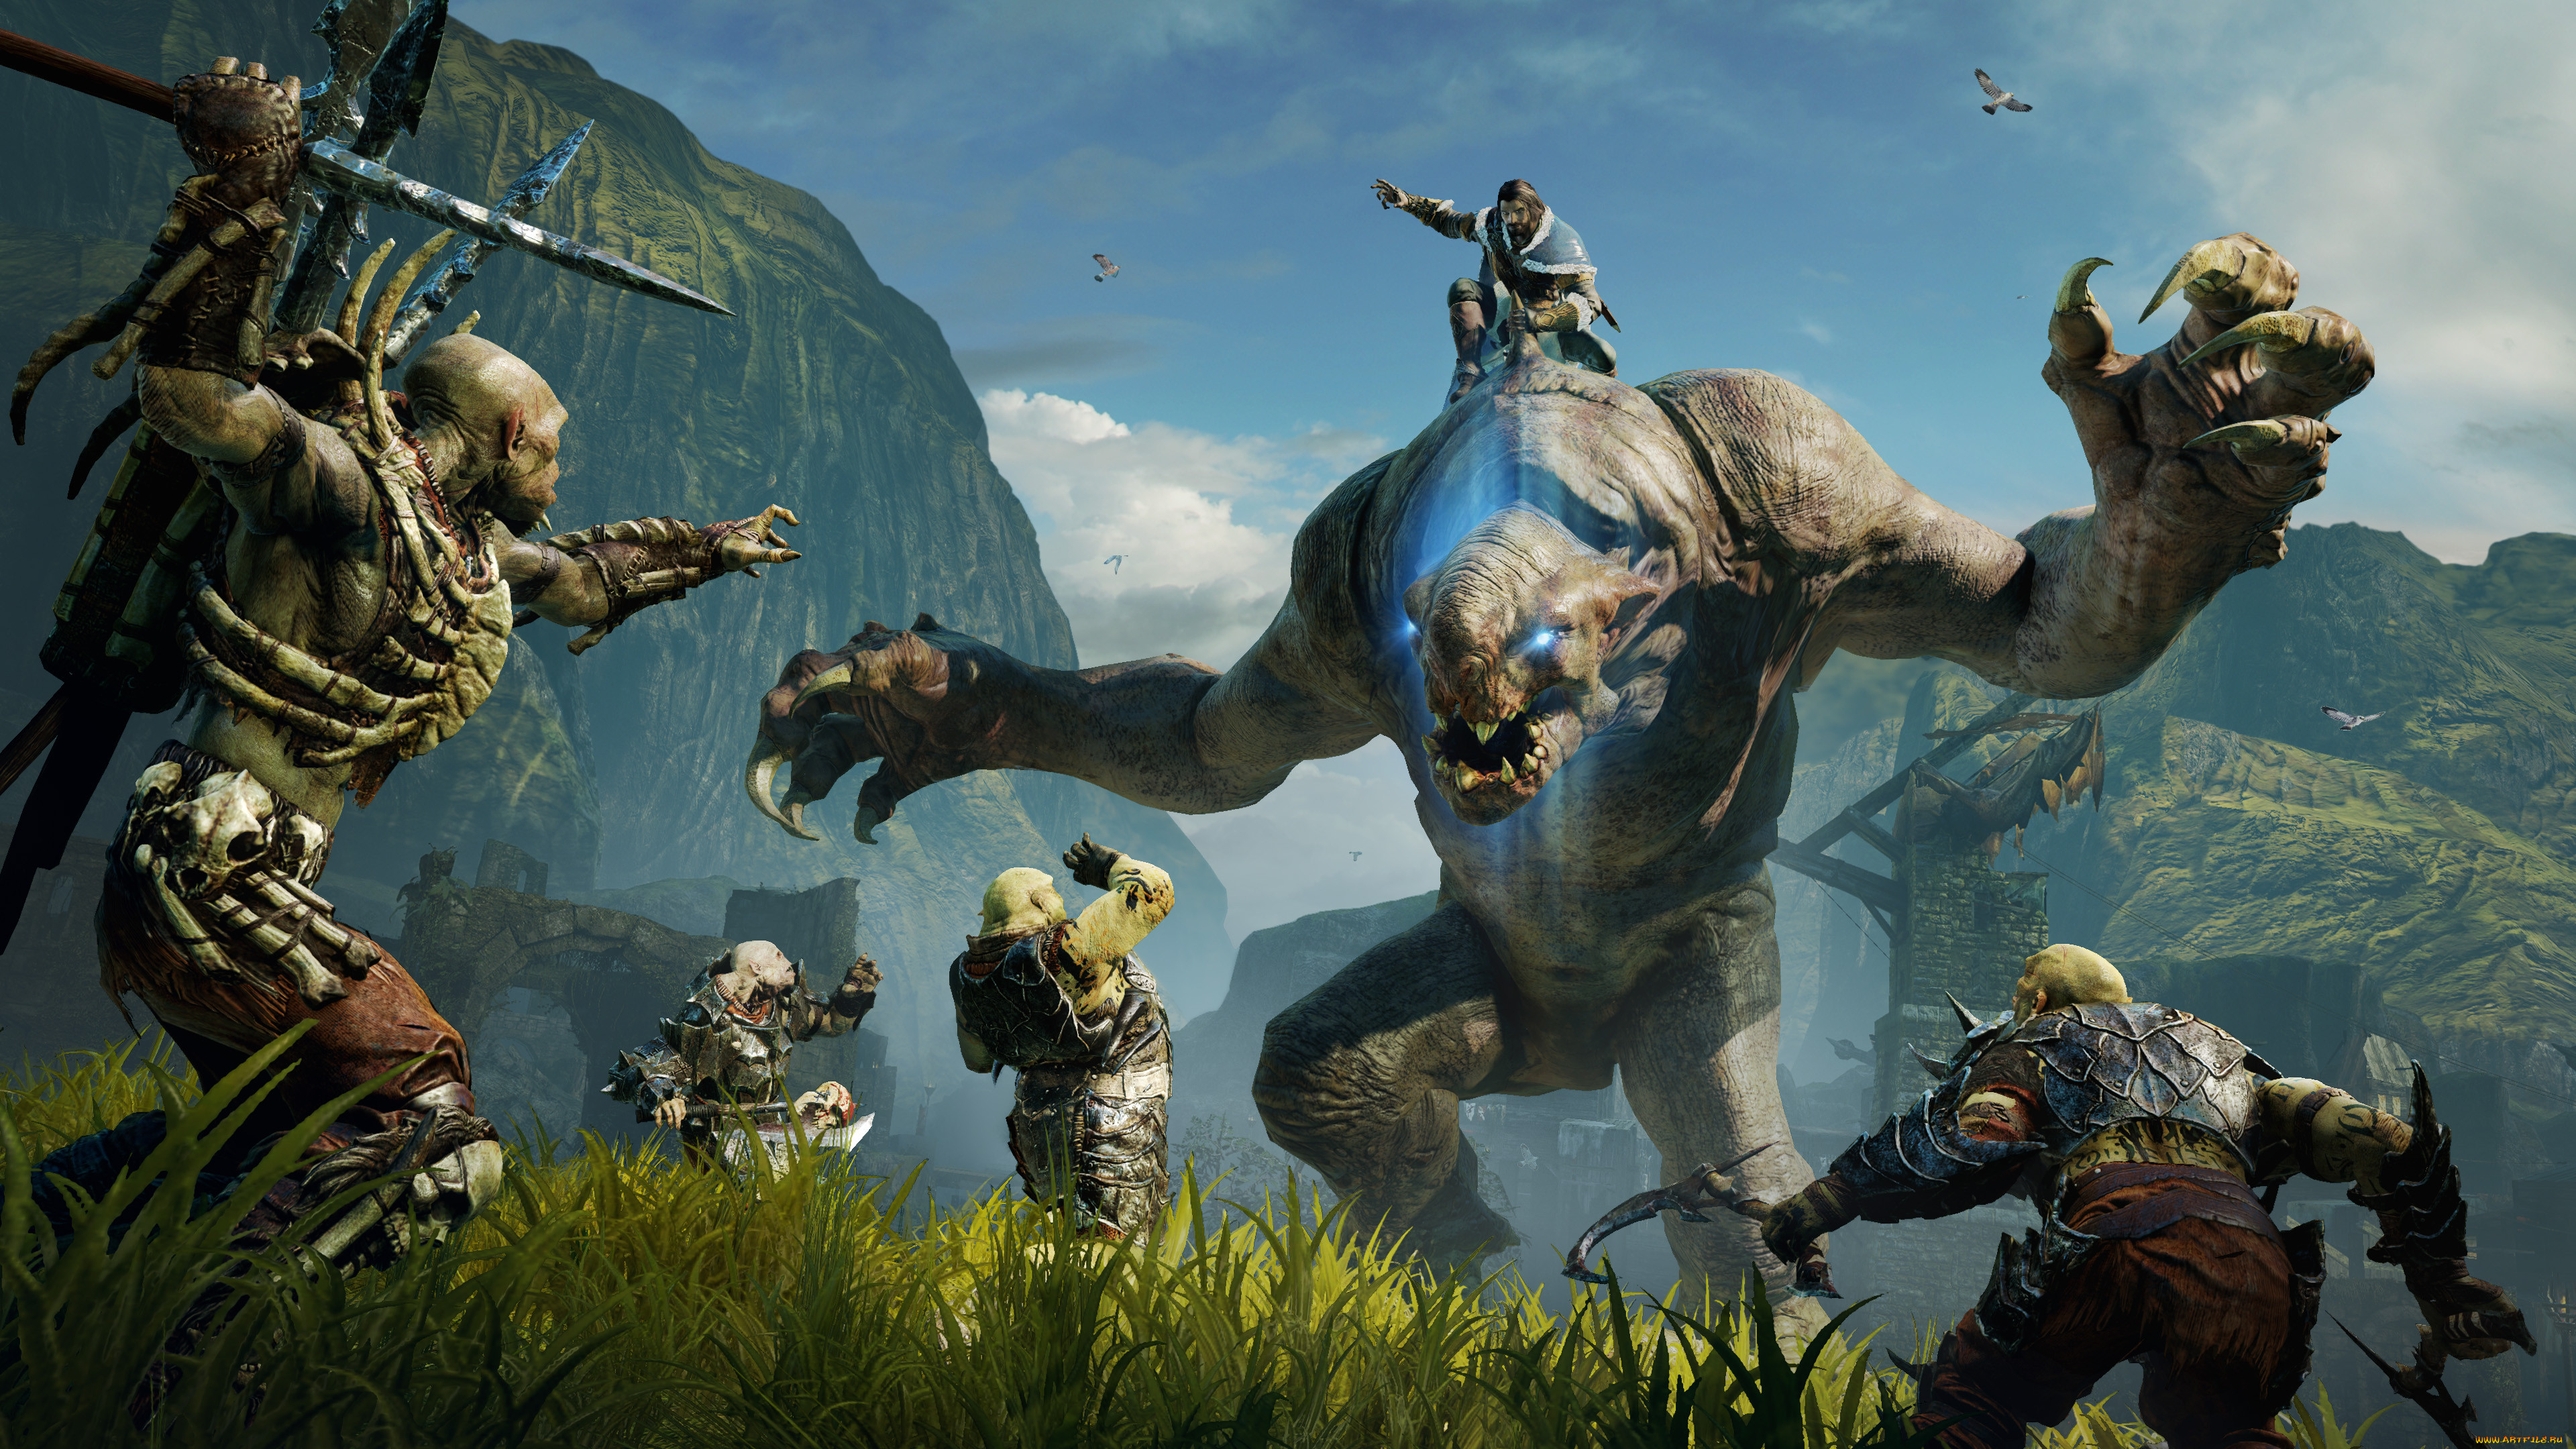 Shadow of mordor game. Middle-Earth: Shadow of Mordor. Игра Средиземье тени Мордора. Средиземье: тени Мордора (ps4). Средиземье тени Мордора 2.